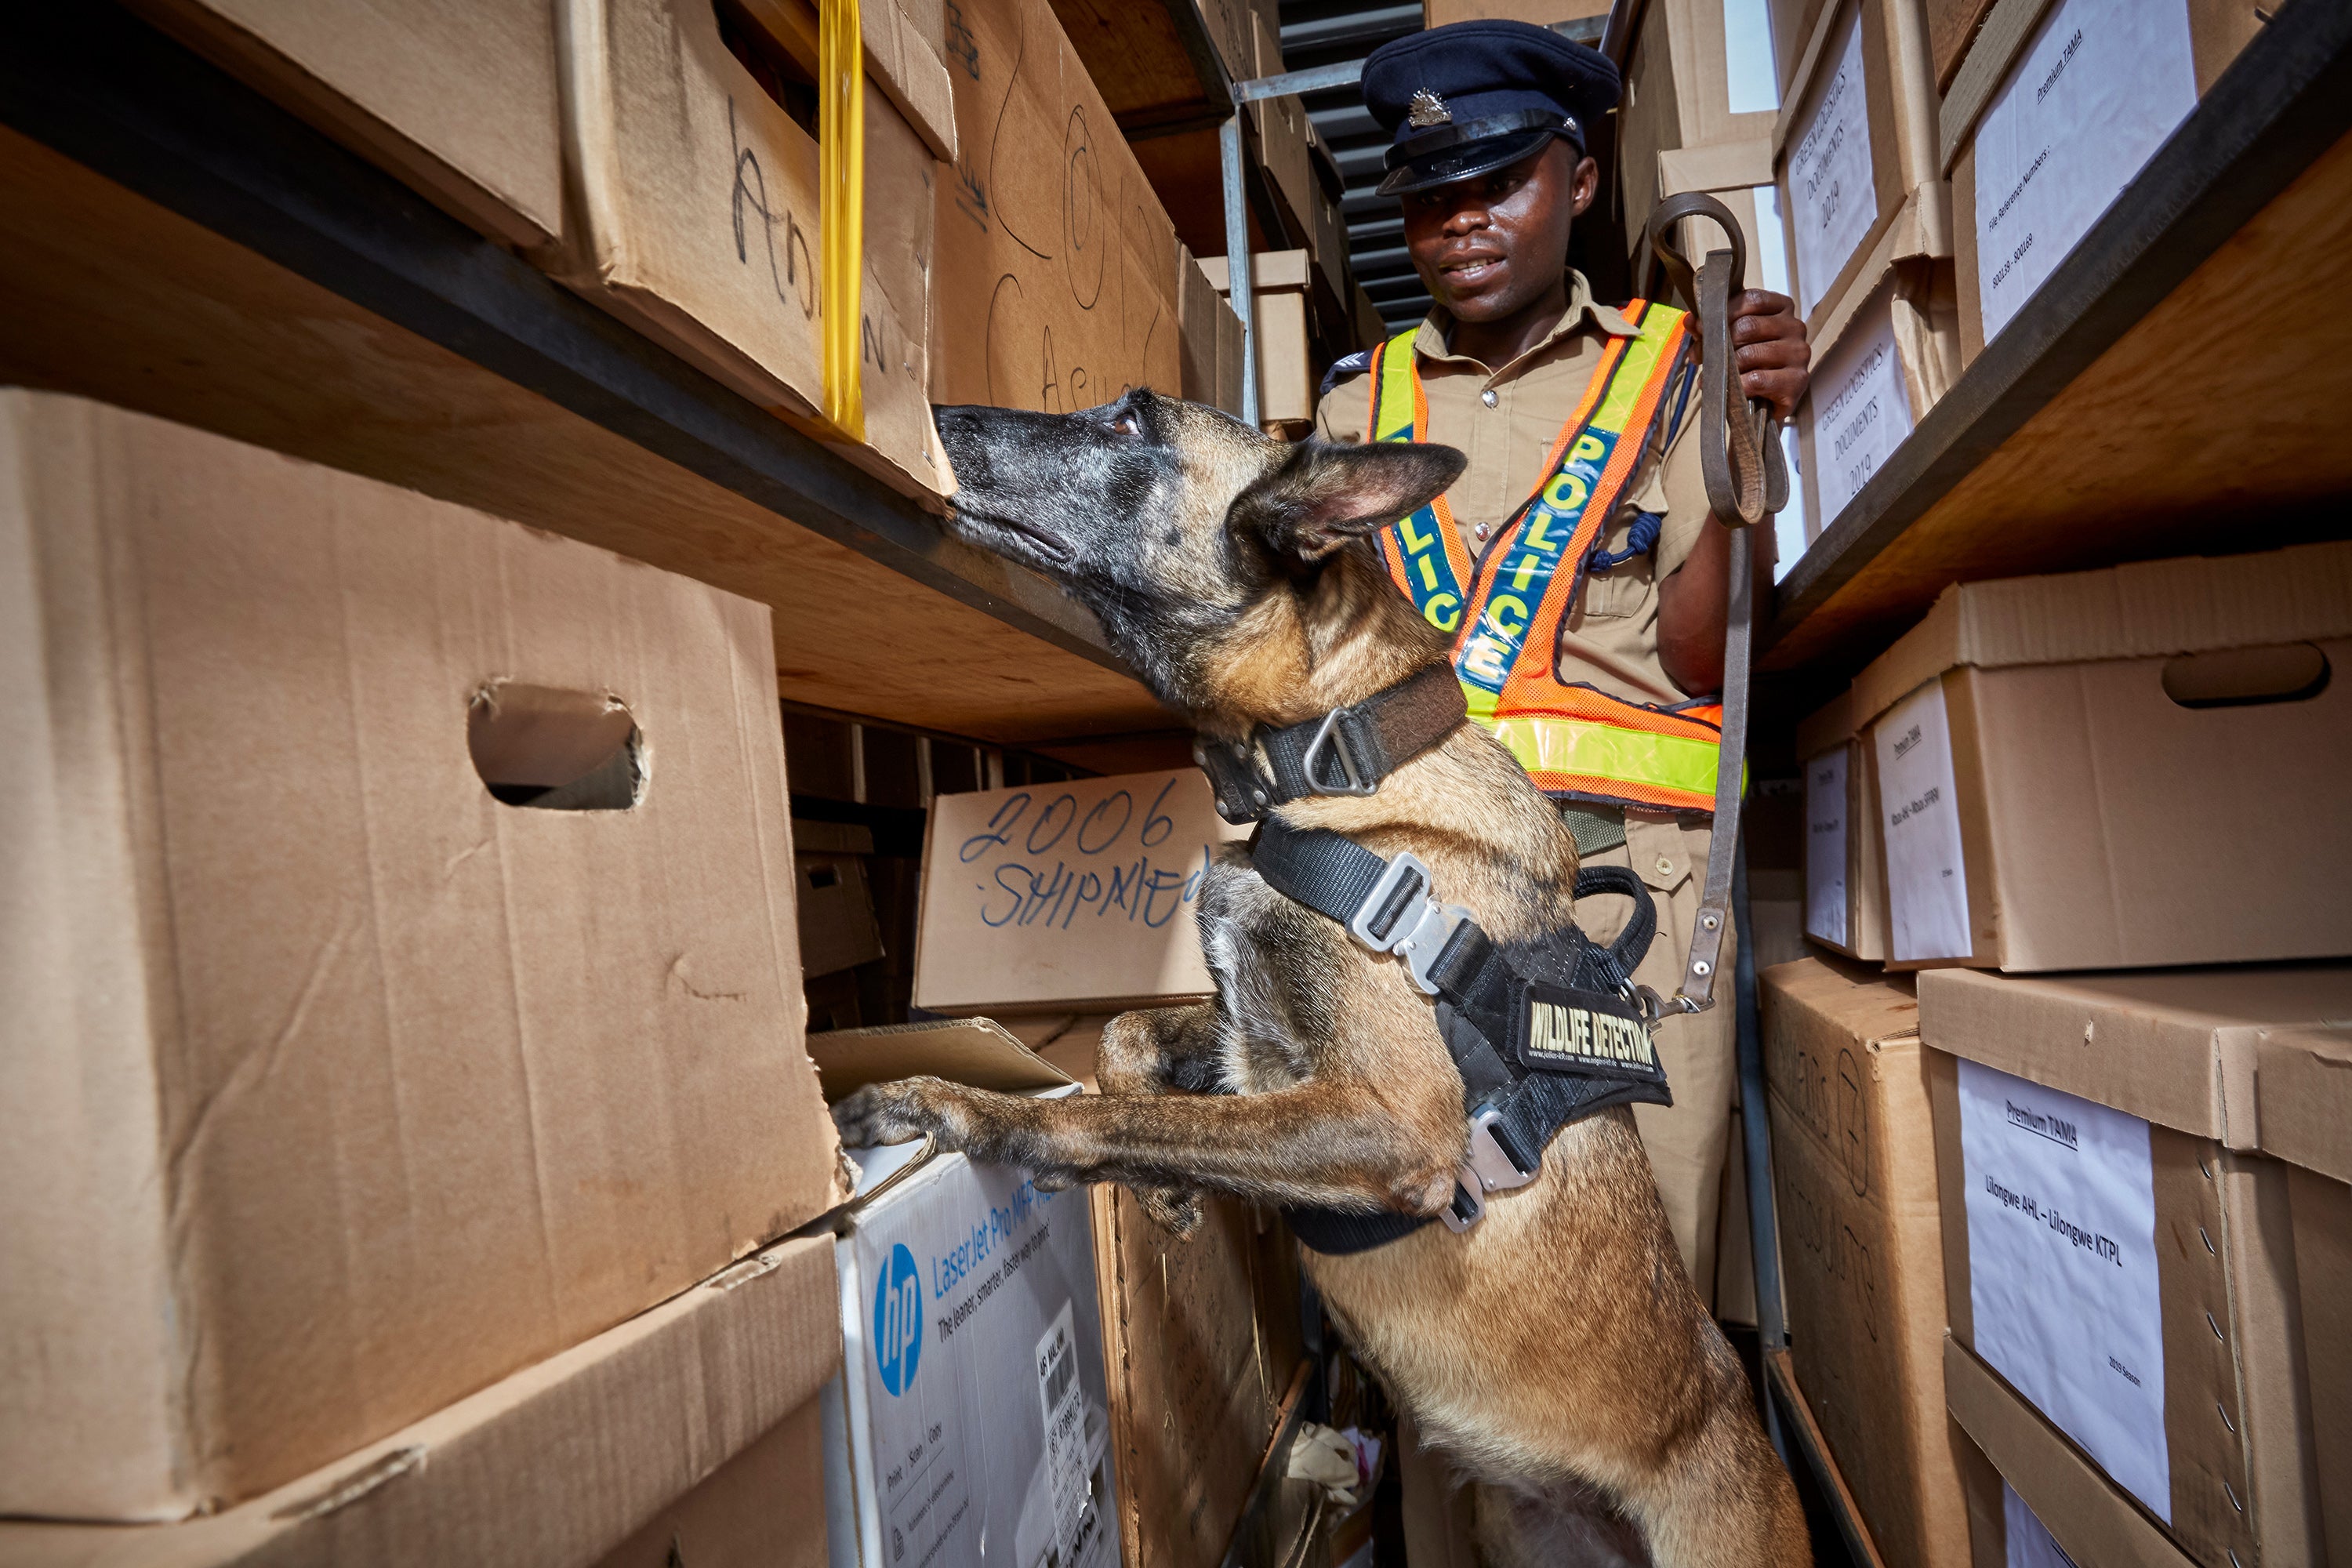 Shipping containers are particularly difficult to search as they are hermetically sealed and require a warrant to open. Unless one of them is suspected of containing a large amount of illegal wildlife products like ivory or rhino horn, the dogs would not be able to search inside